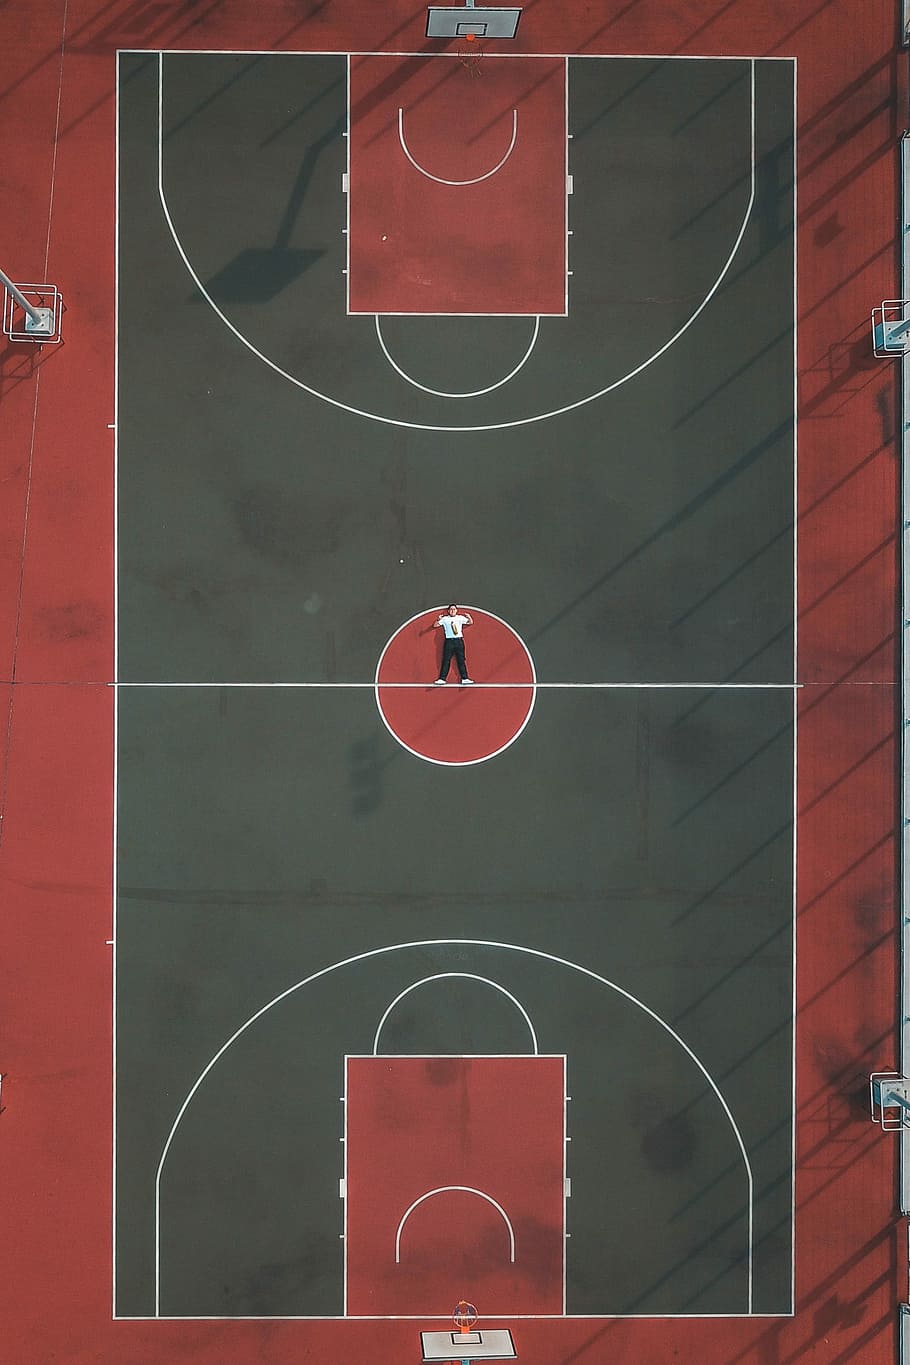 shots from the court, man lying in the middle of basketball court